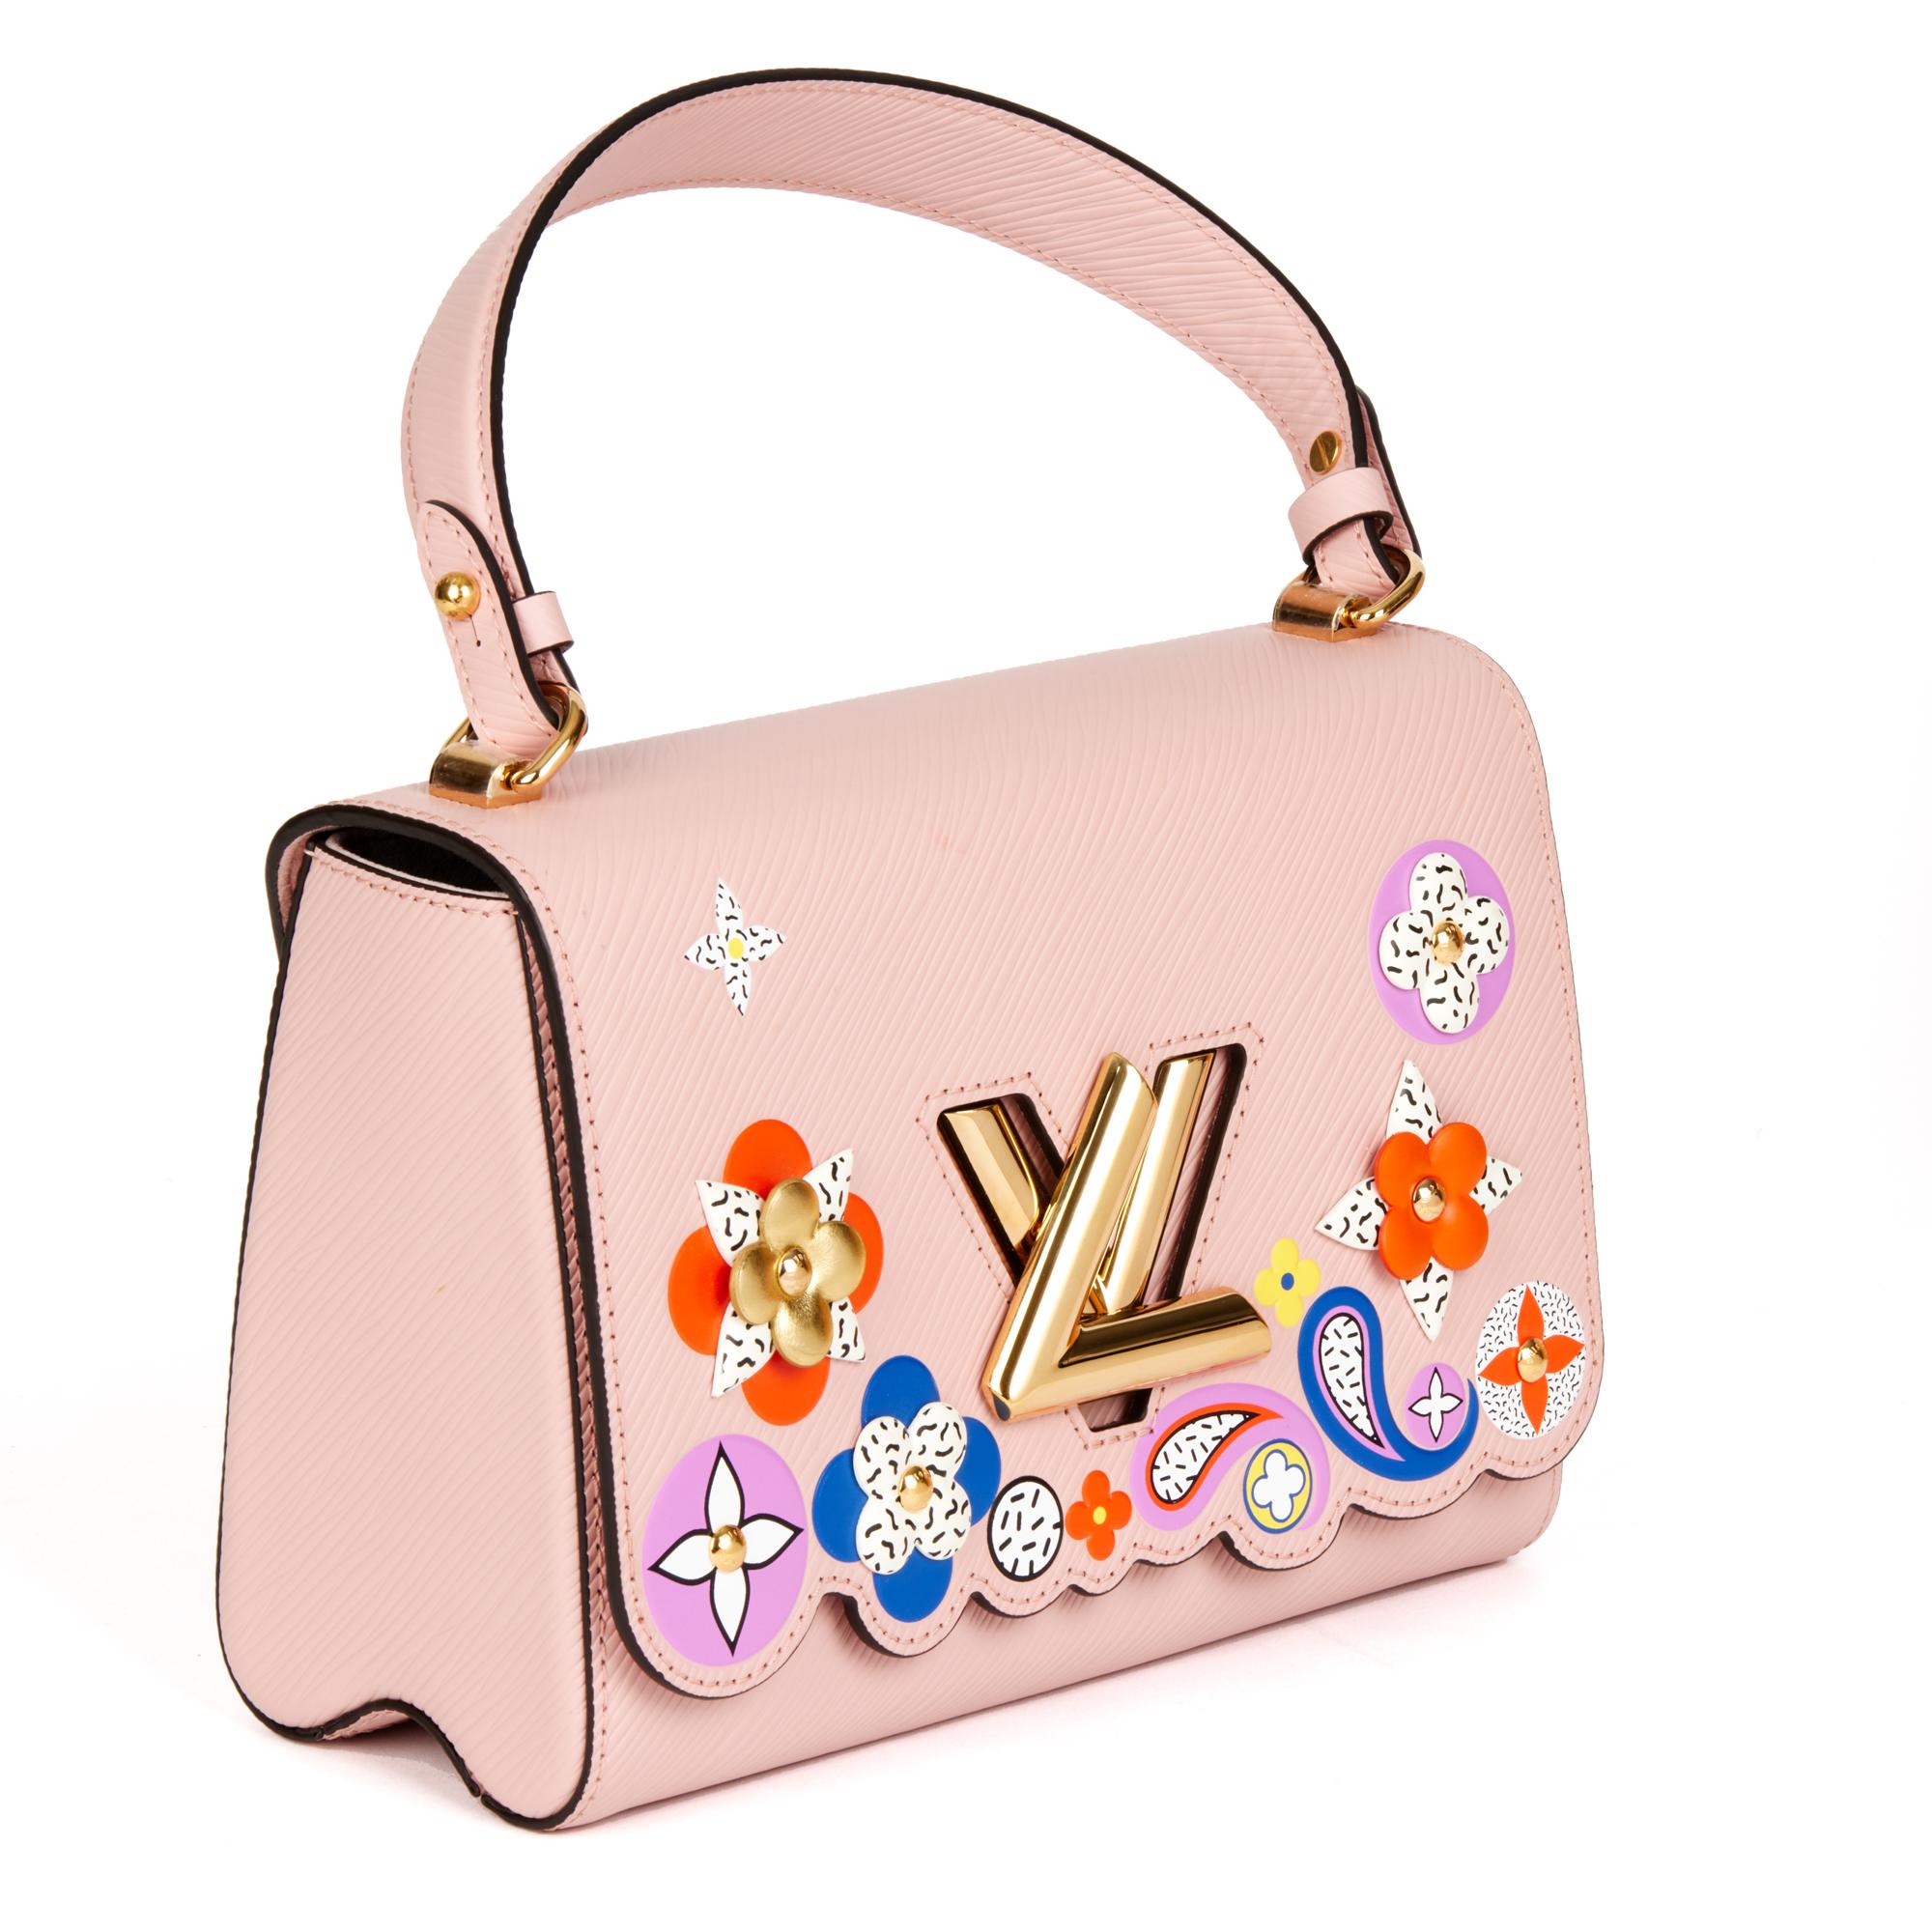 LOUIS VUITTON
Pink Epi Leather Limited Edition Bloom Flower Twist MM

Xupes Reference: CB580
Serial Number: FL 4117
Age (Circa): 2017
Accompanied By: Louis Vuitton Dust Bag, Box, Shoulder Chain, Louis Vuitton Invoice, Care Booklet
Authenticity